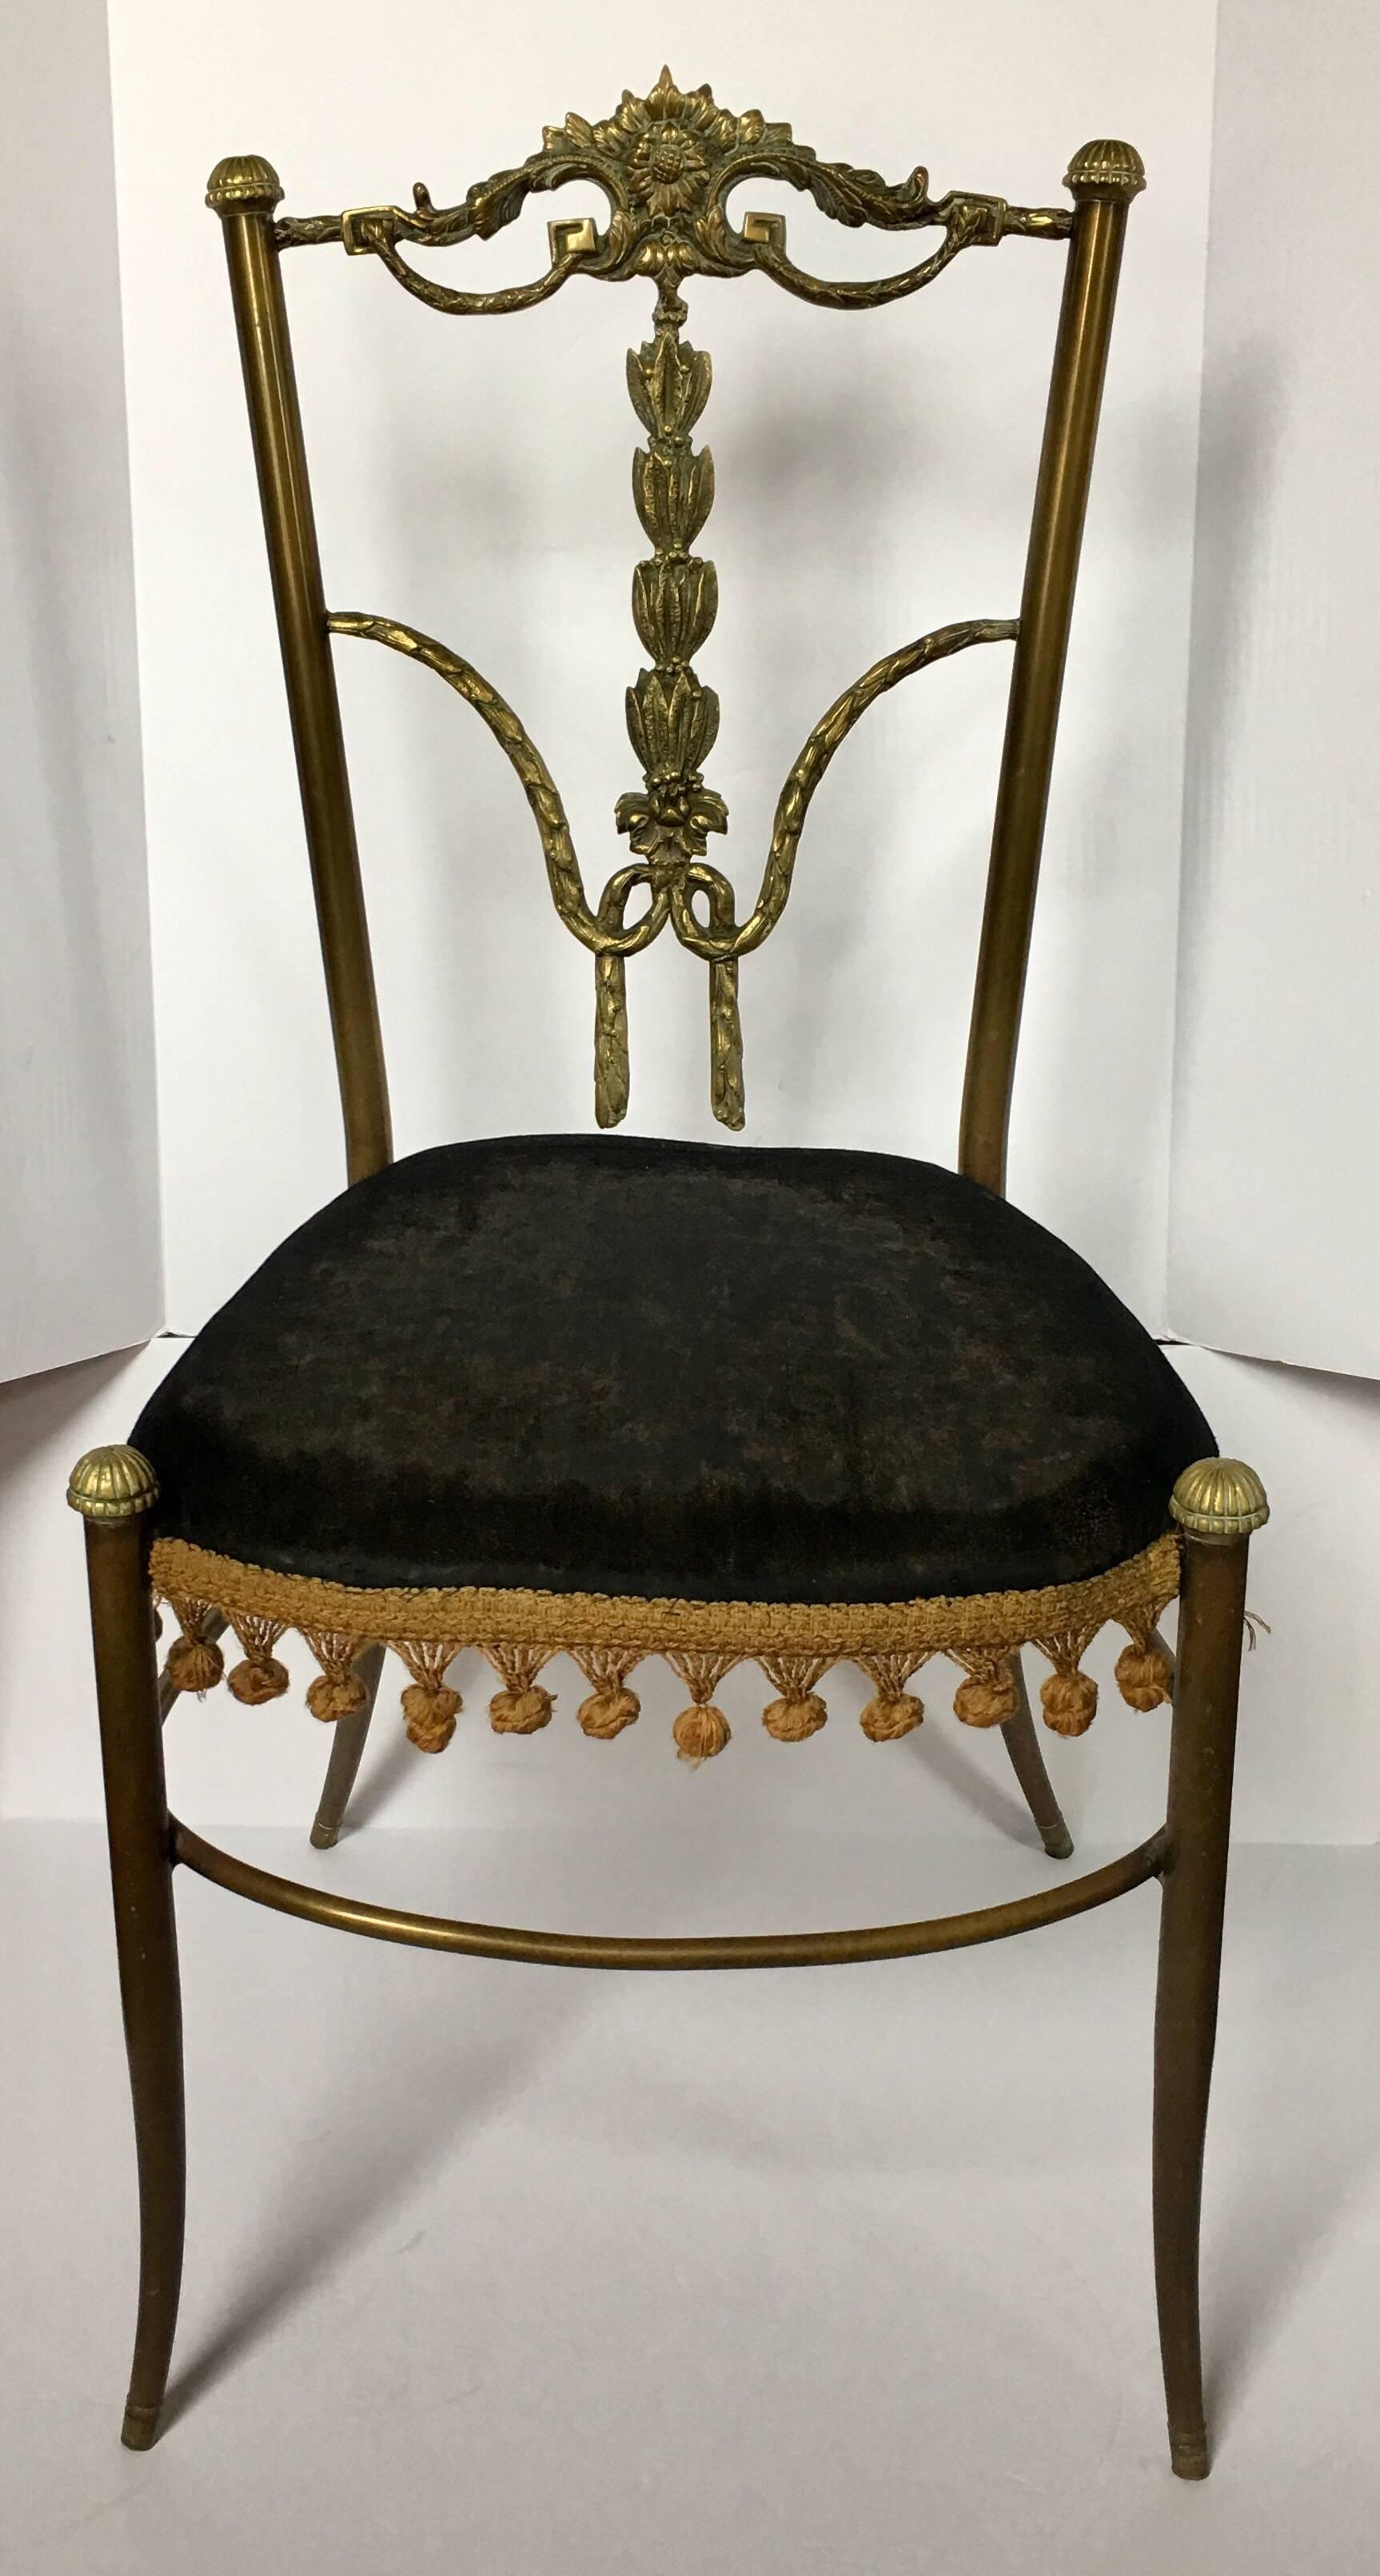 1950s bronze metal accent or desk chair featuring an ornate back with floral draped garland motifs and Greek key details. Seat features original black velvet with gold ball fringe trim.
